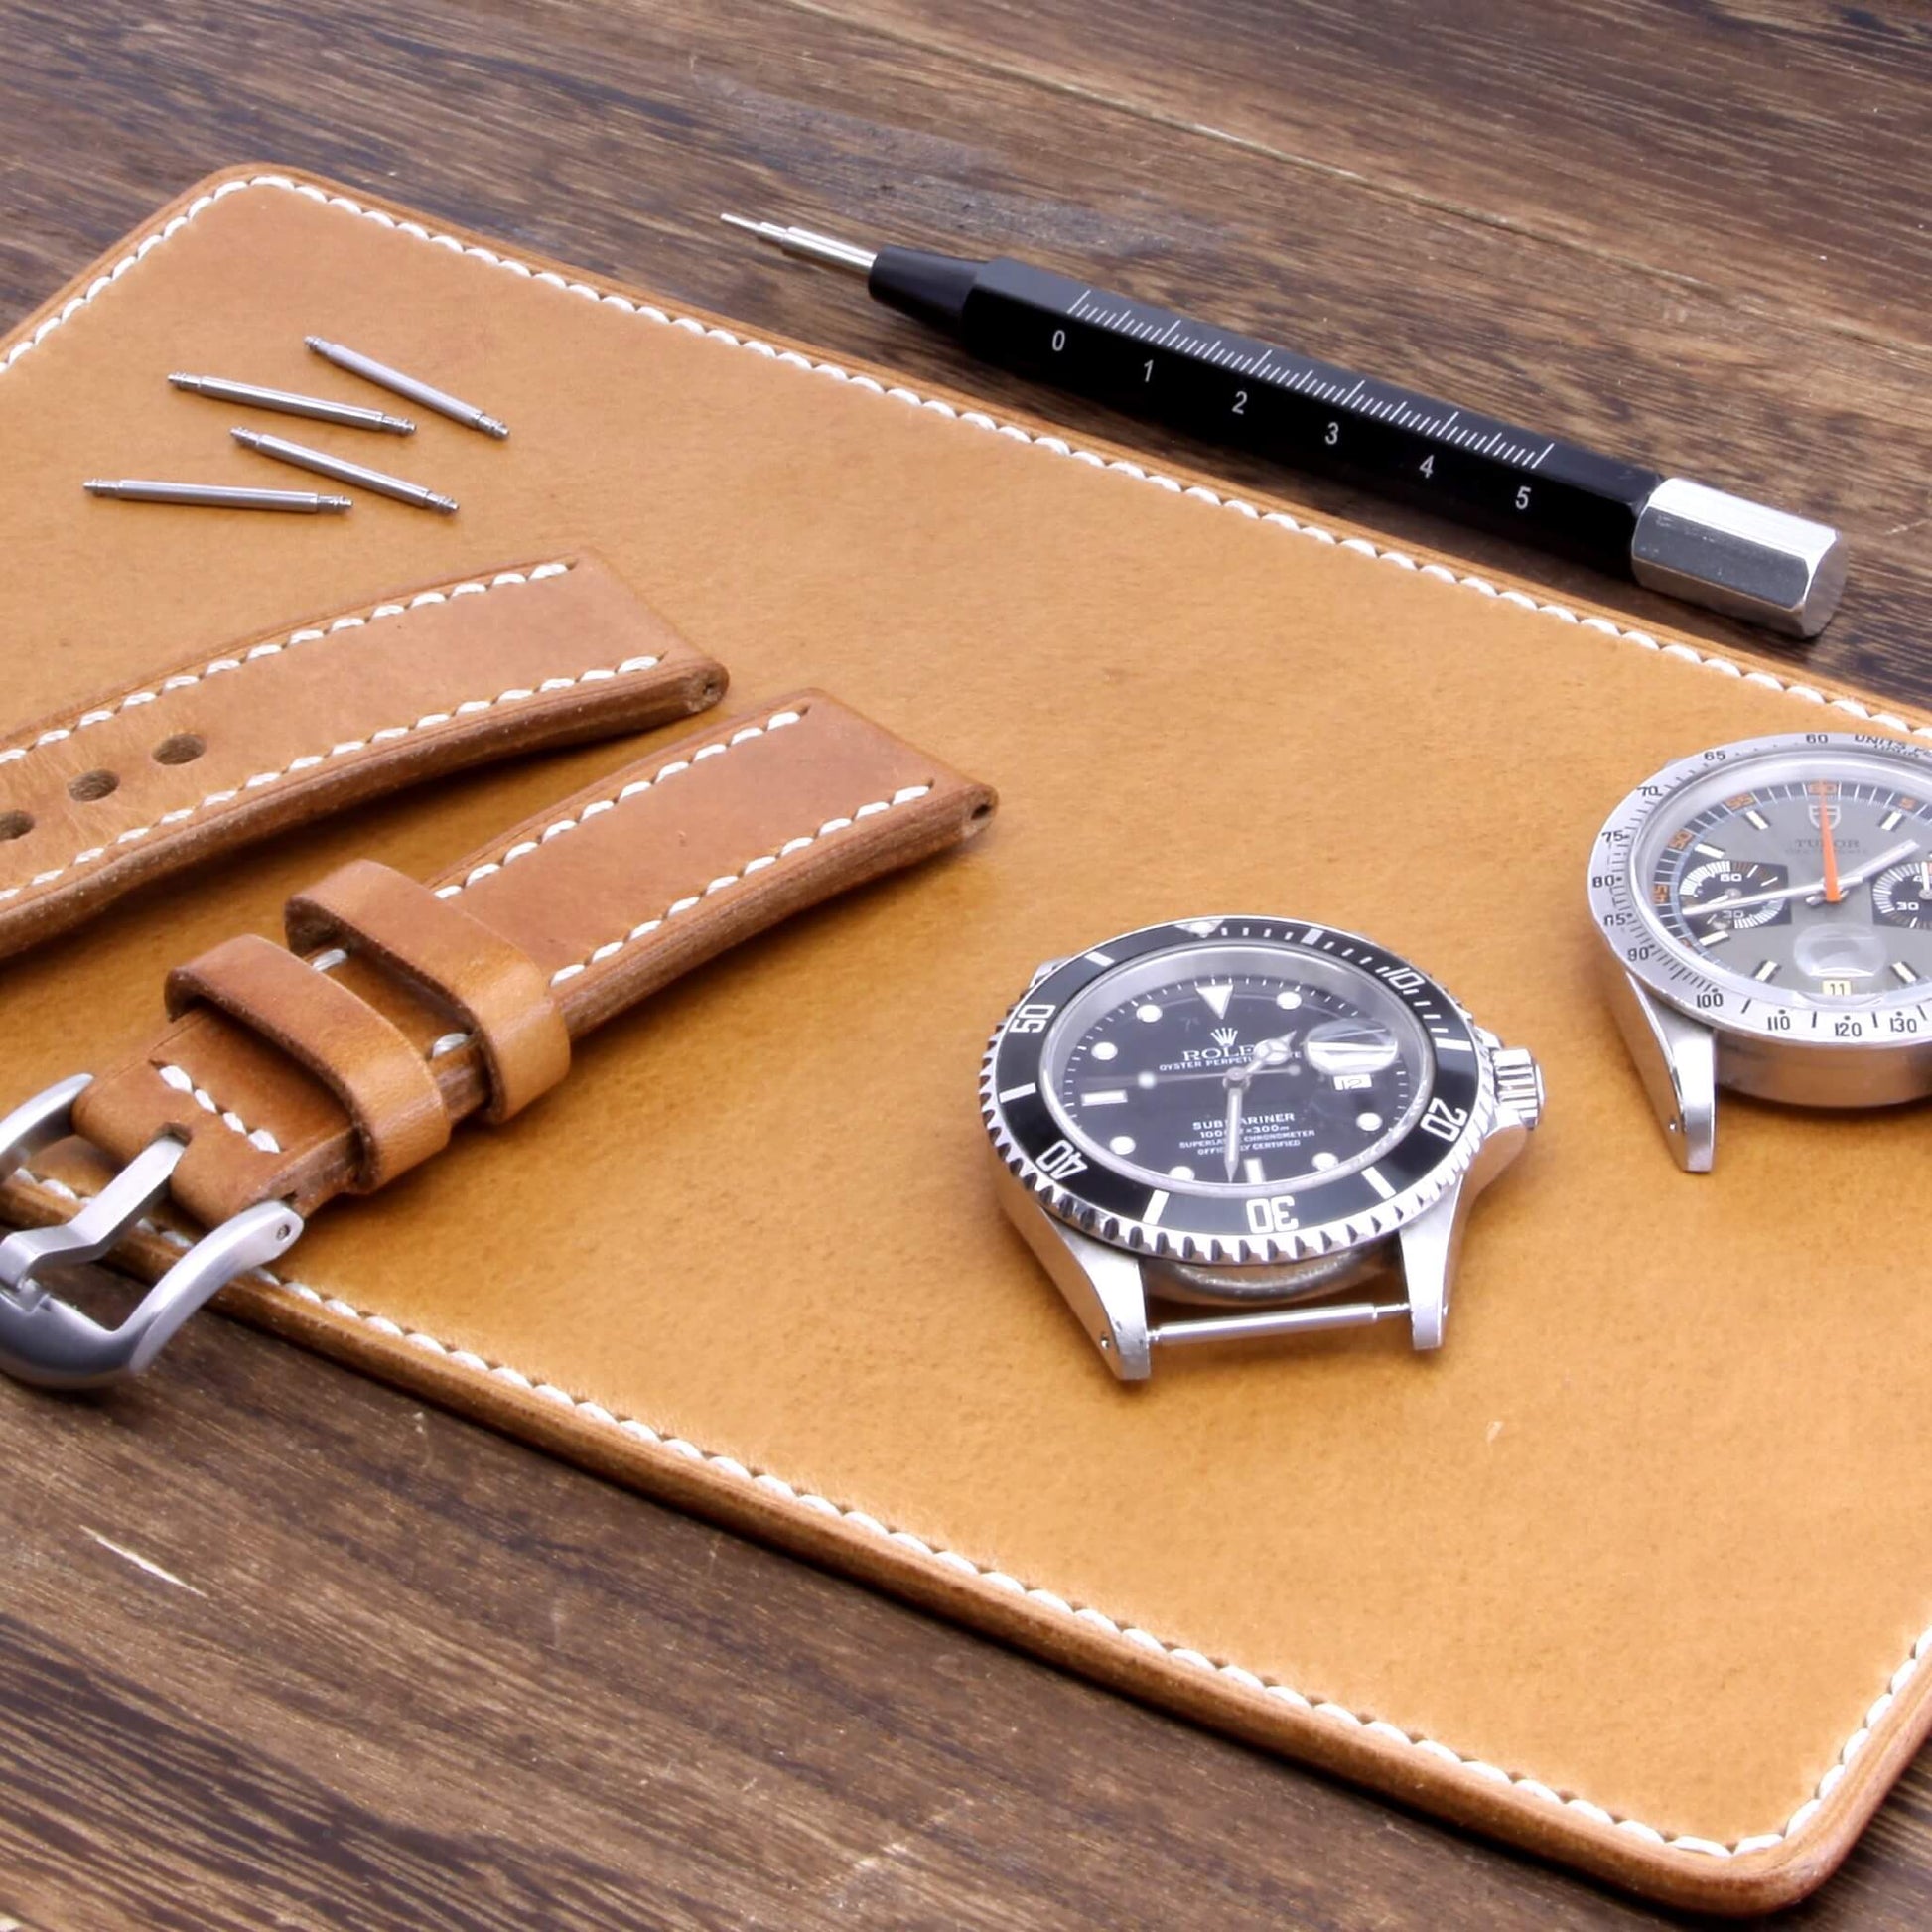 Leather Watch Valet, Sequoia 101 | Italian Veg Tanned Leather | Cozy Handmade